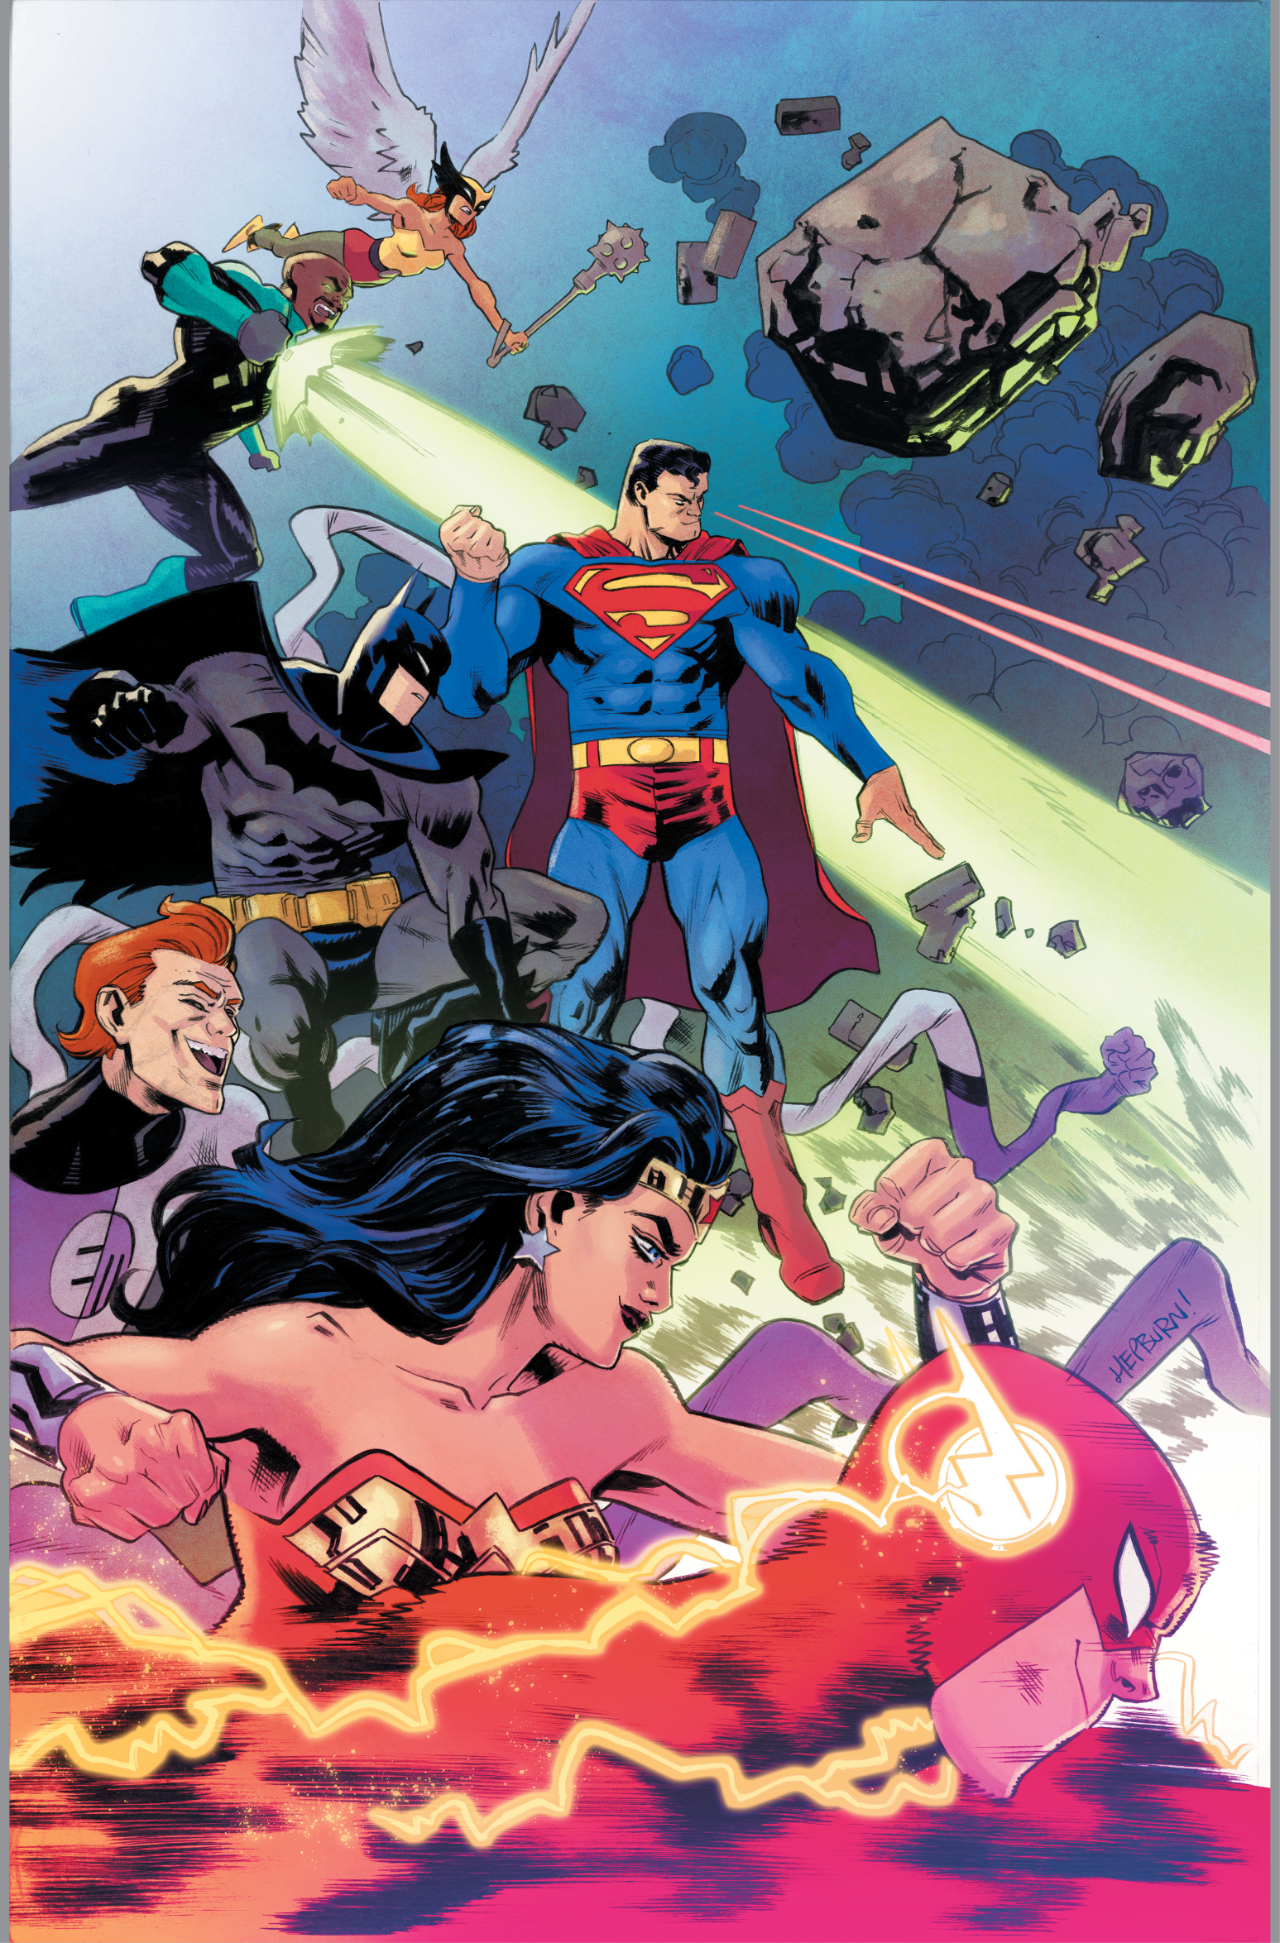 DC July 2021 solicitations